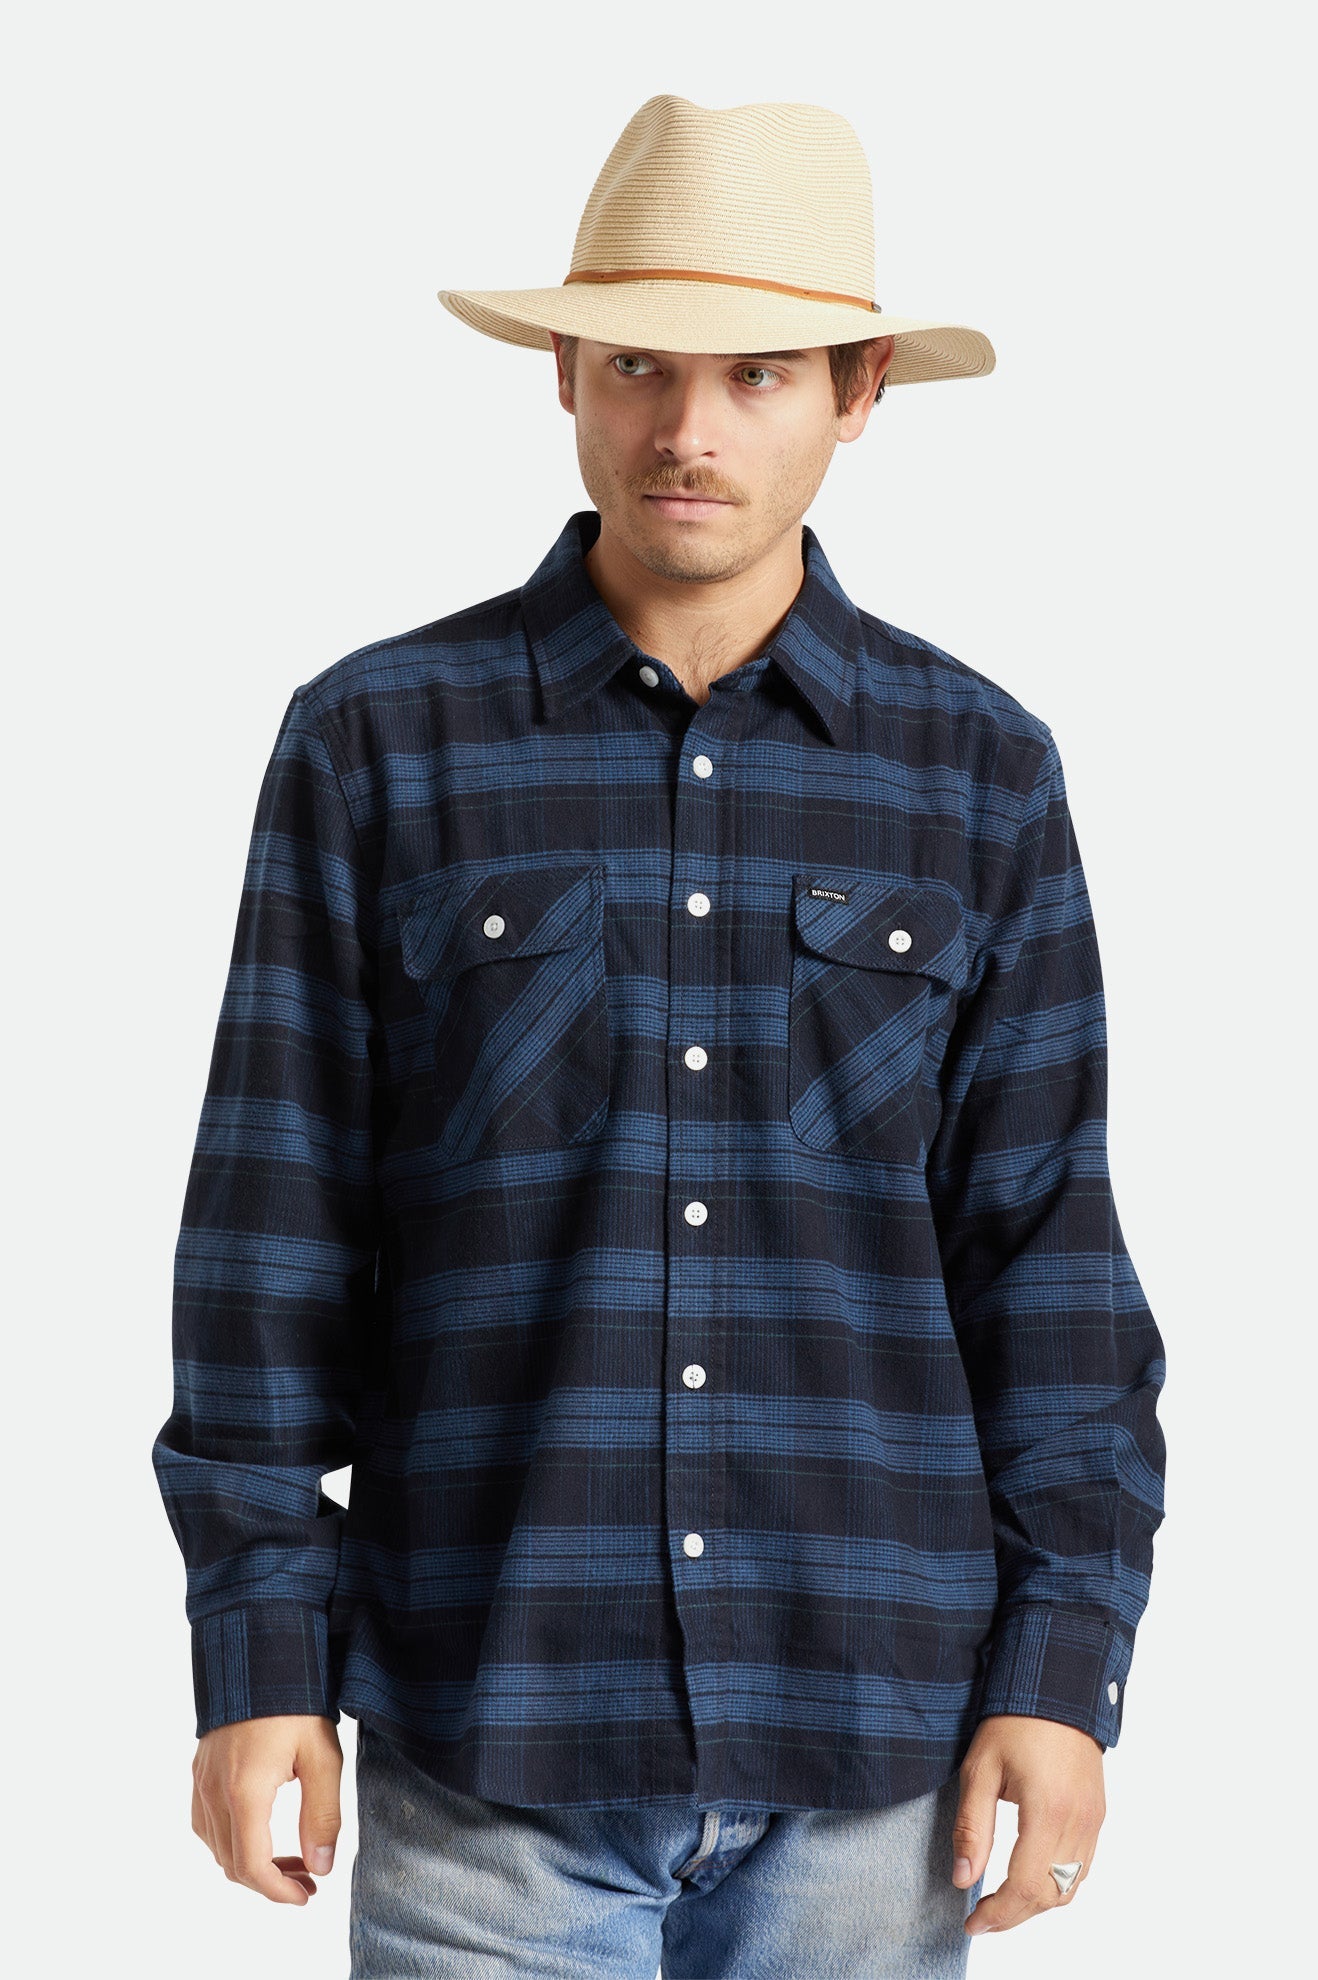 Wesley Straw Packable Fedora